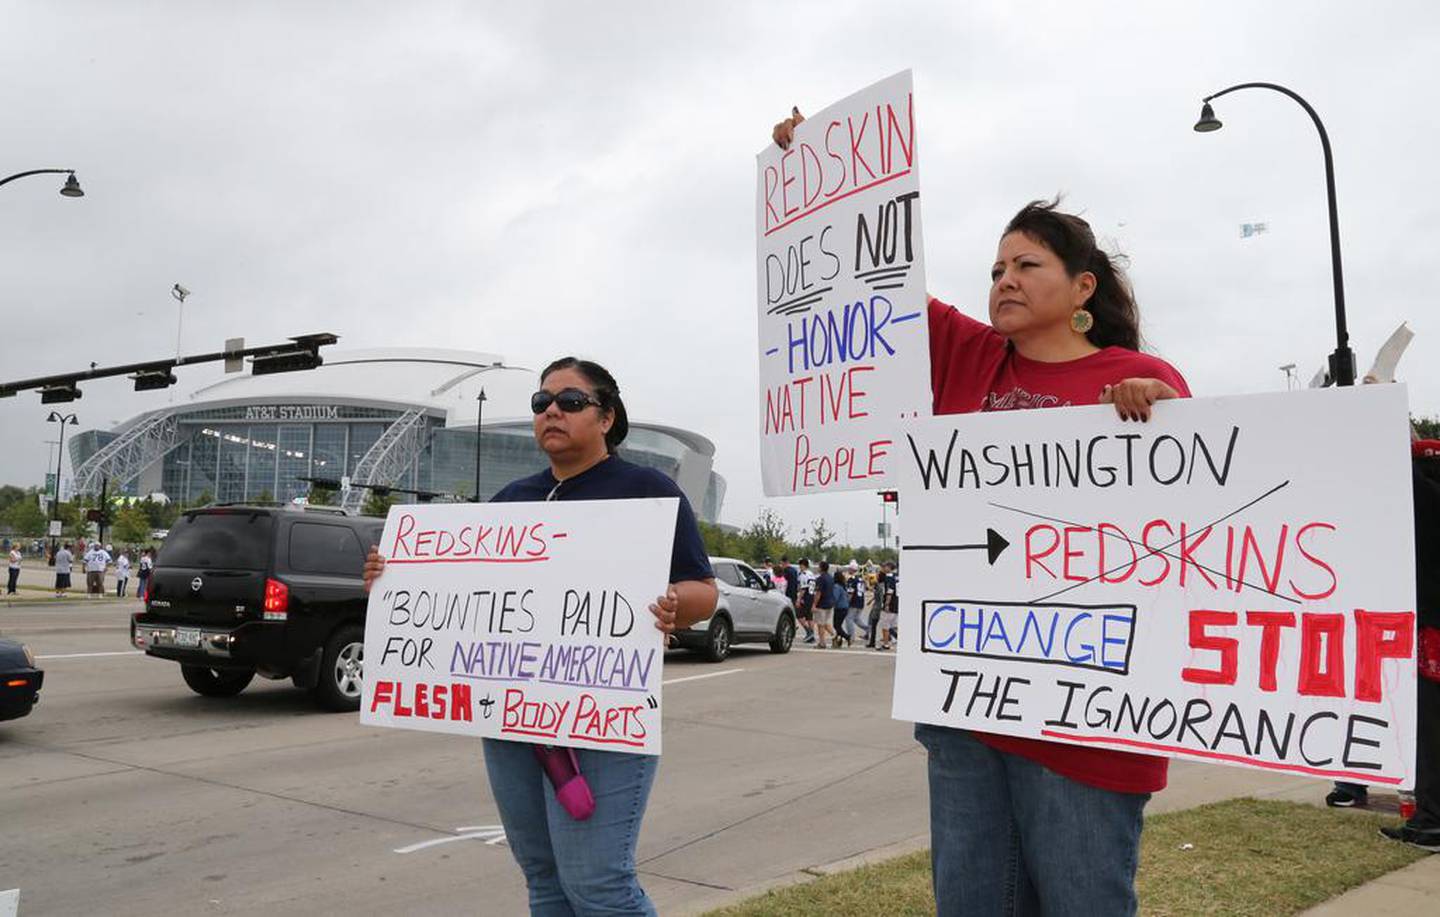 Native Americans Diana Parton, left, and Yolonda Bluehorse protest against the football team's nickname, which was changed last year due to mounting pressure. USA Today

